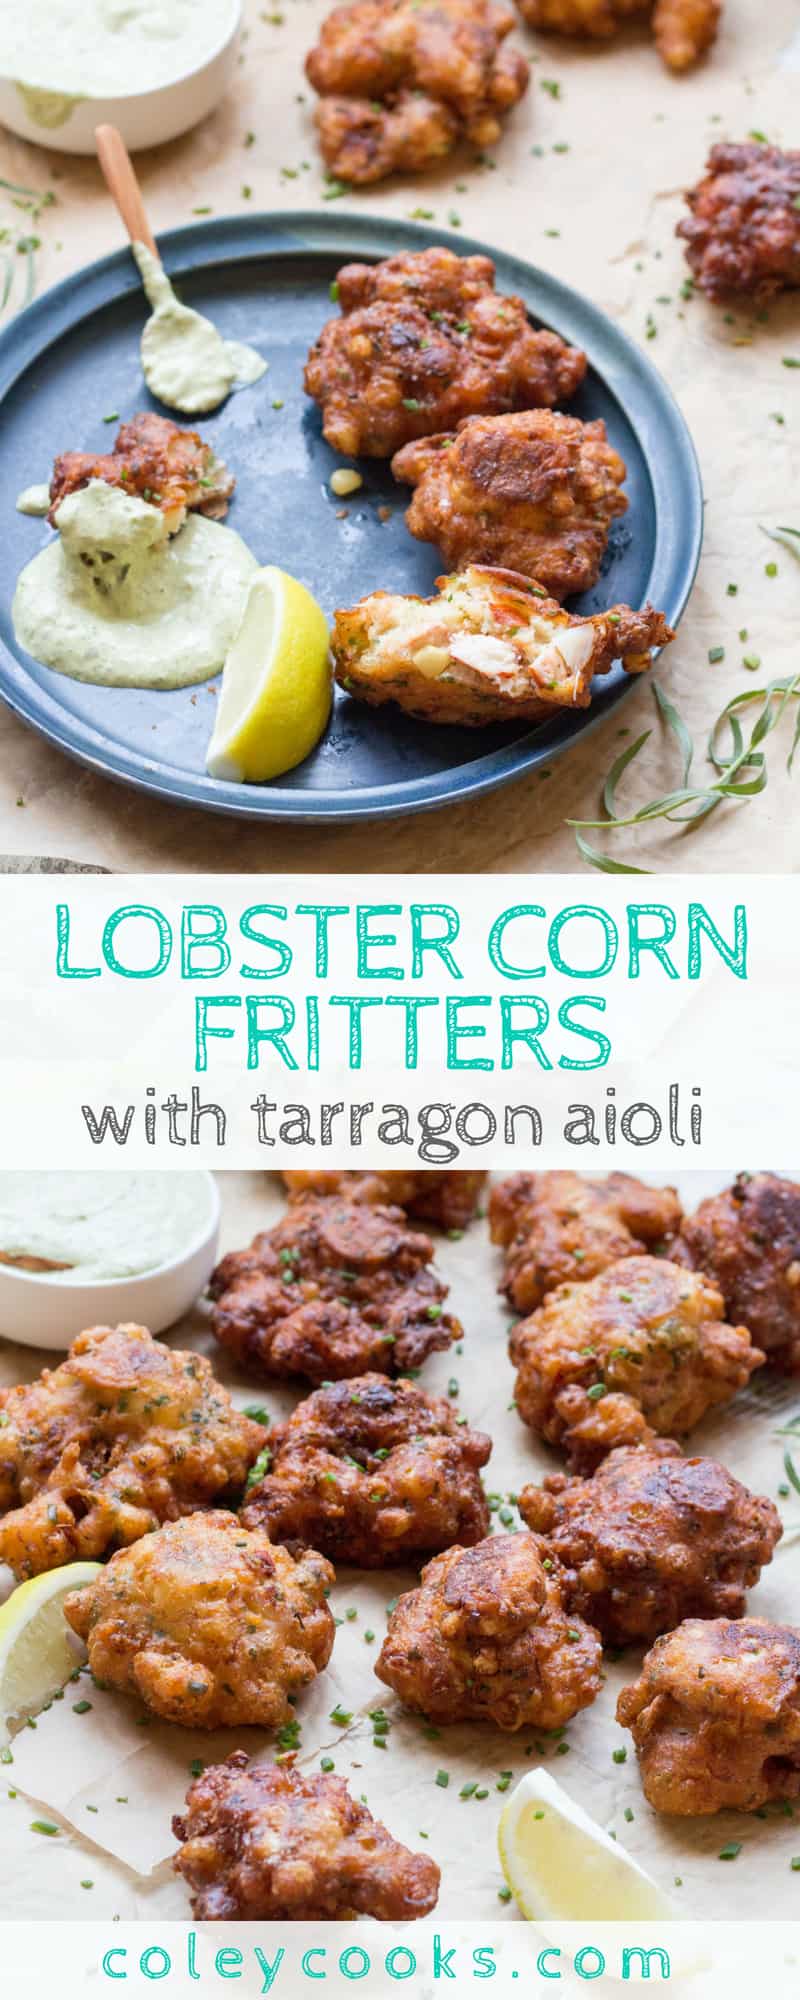 LOBSTER CORN FRITTERS with TARRAGON AIOLI | This easy lobster recipe is the best summer appetizer ever! Lightly fried with big chunks of lobster and fresh sweet corn. #recipe #appetizer #lobster #corn #summer | ColeyCooks.com